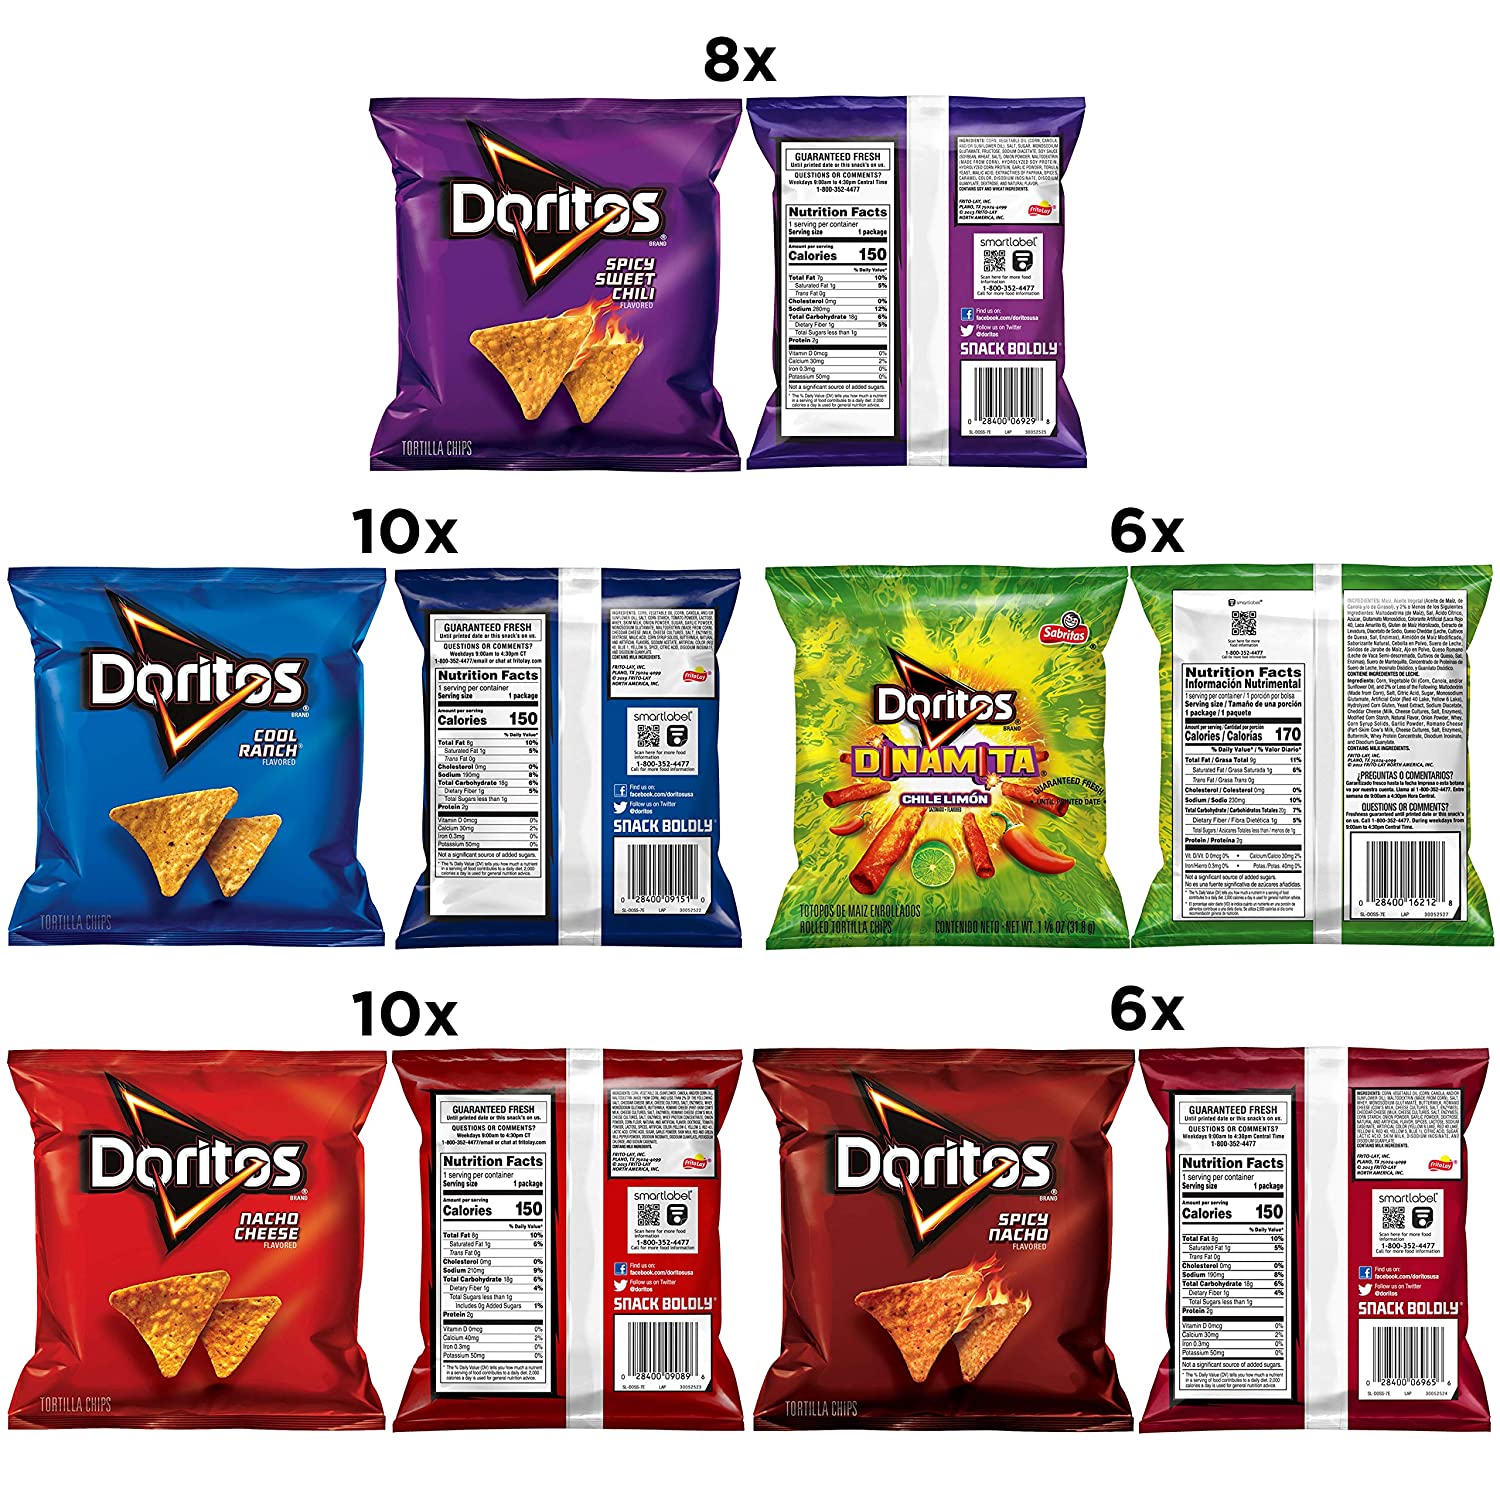 Doritos Flavored Tortilla Chip Variety Pack, 40 Count - image 2 of 6